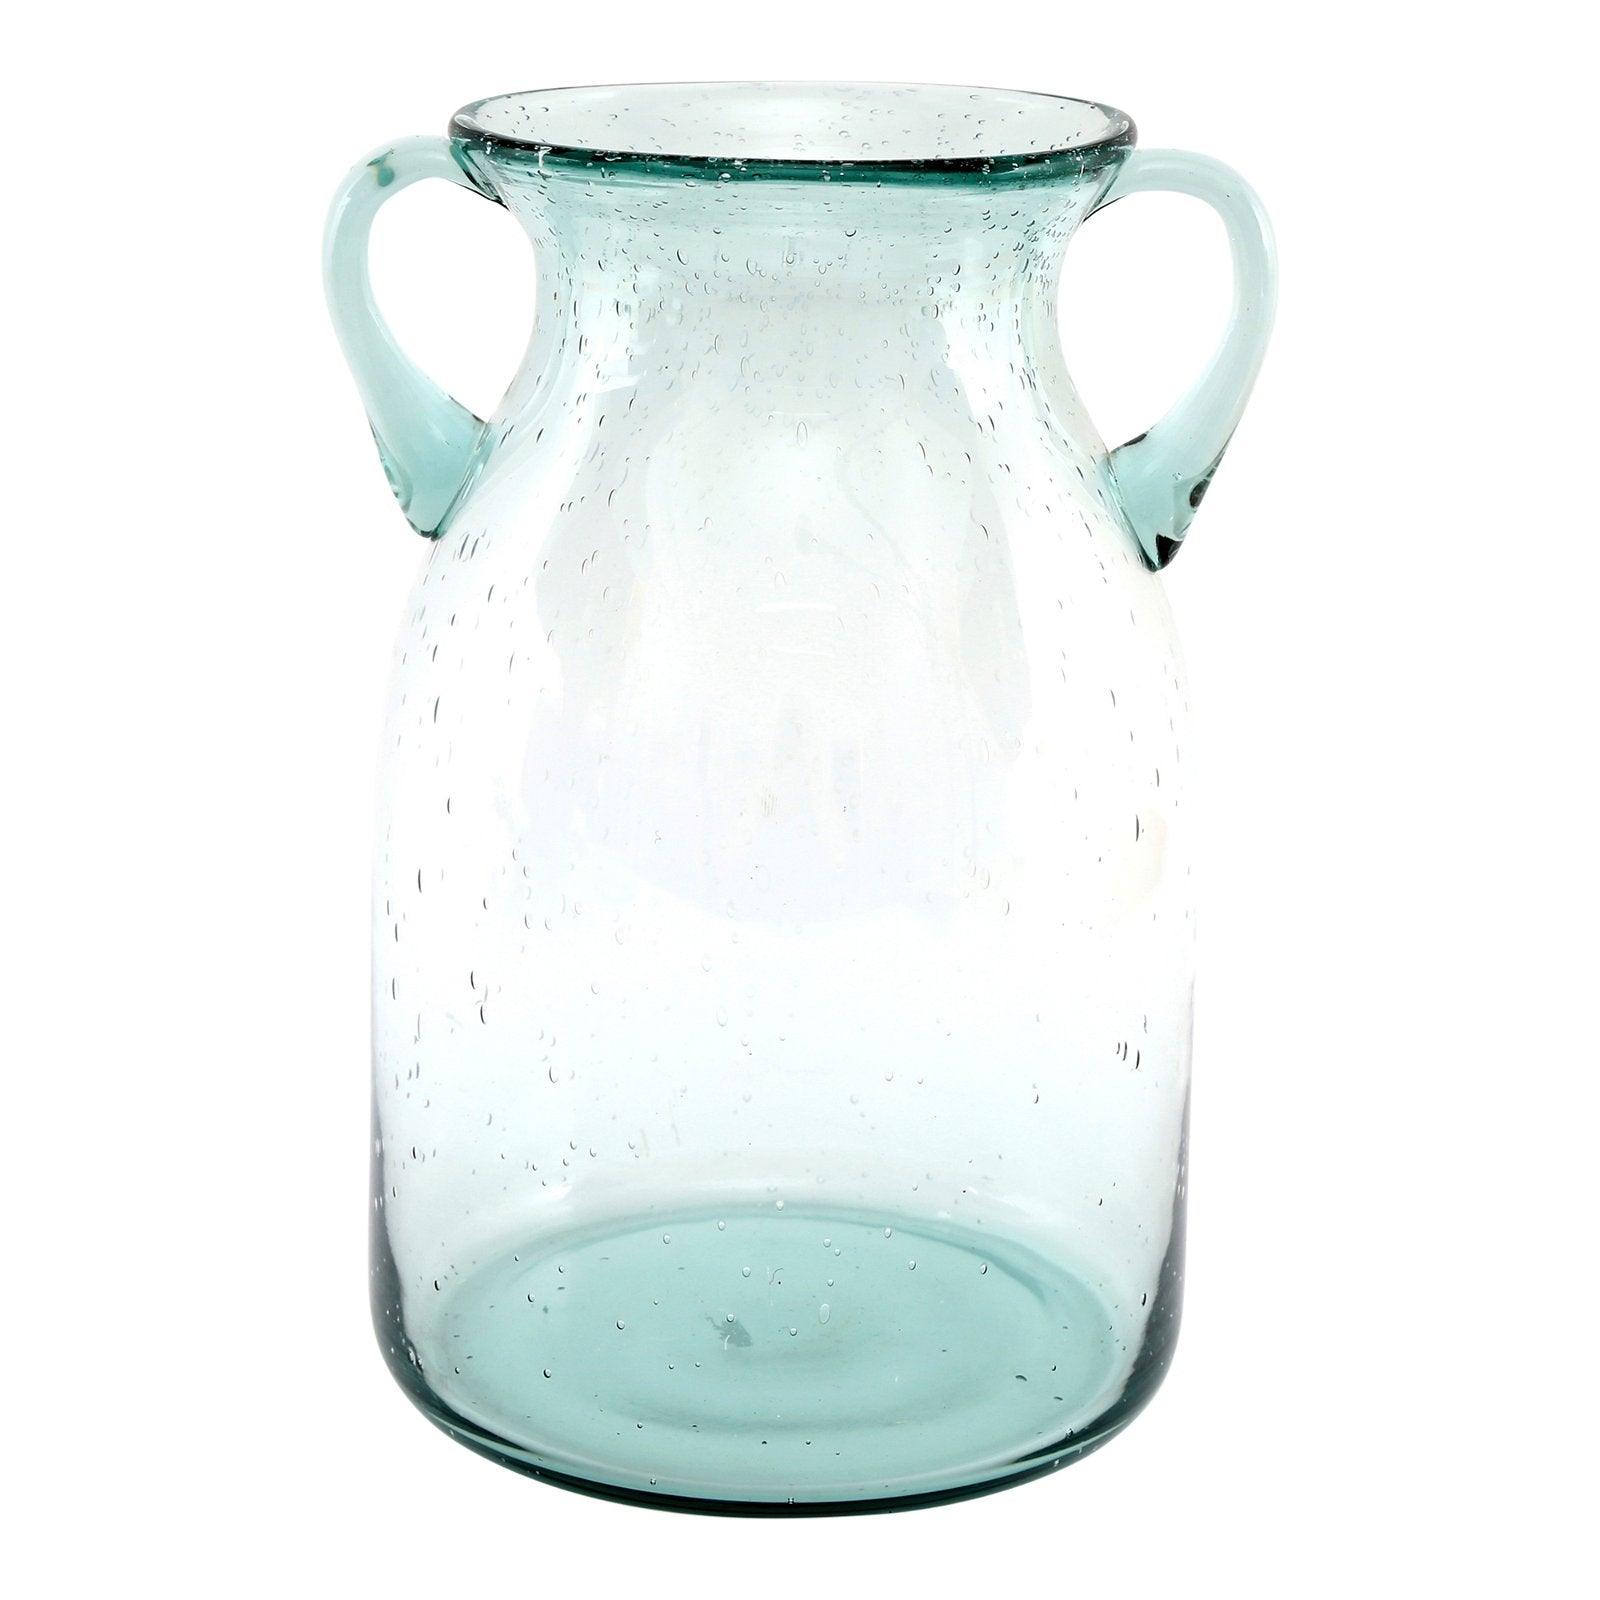 Large Daisy Green Bubble Vase With Handles - £49.99 - Vases 